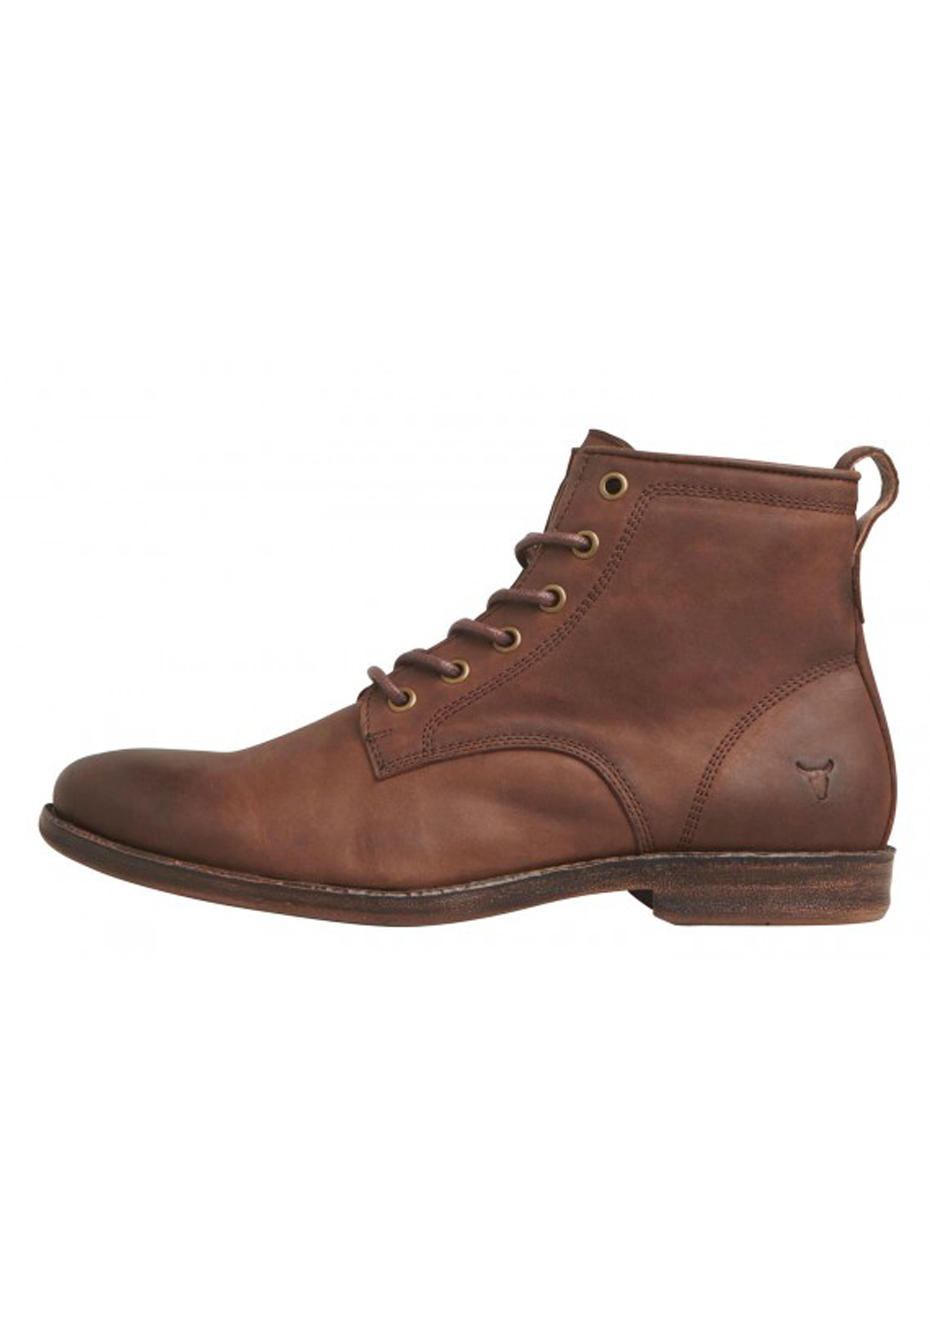 windsor smith lace up boots